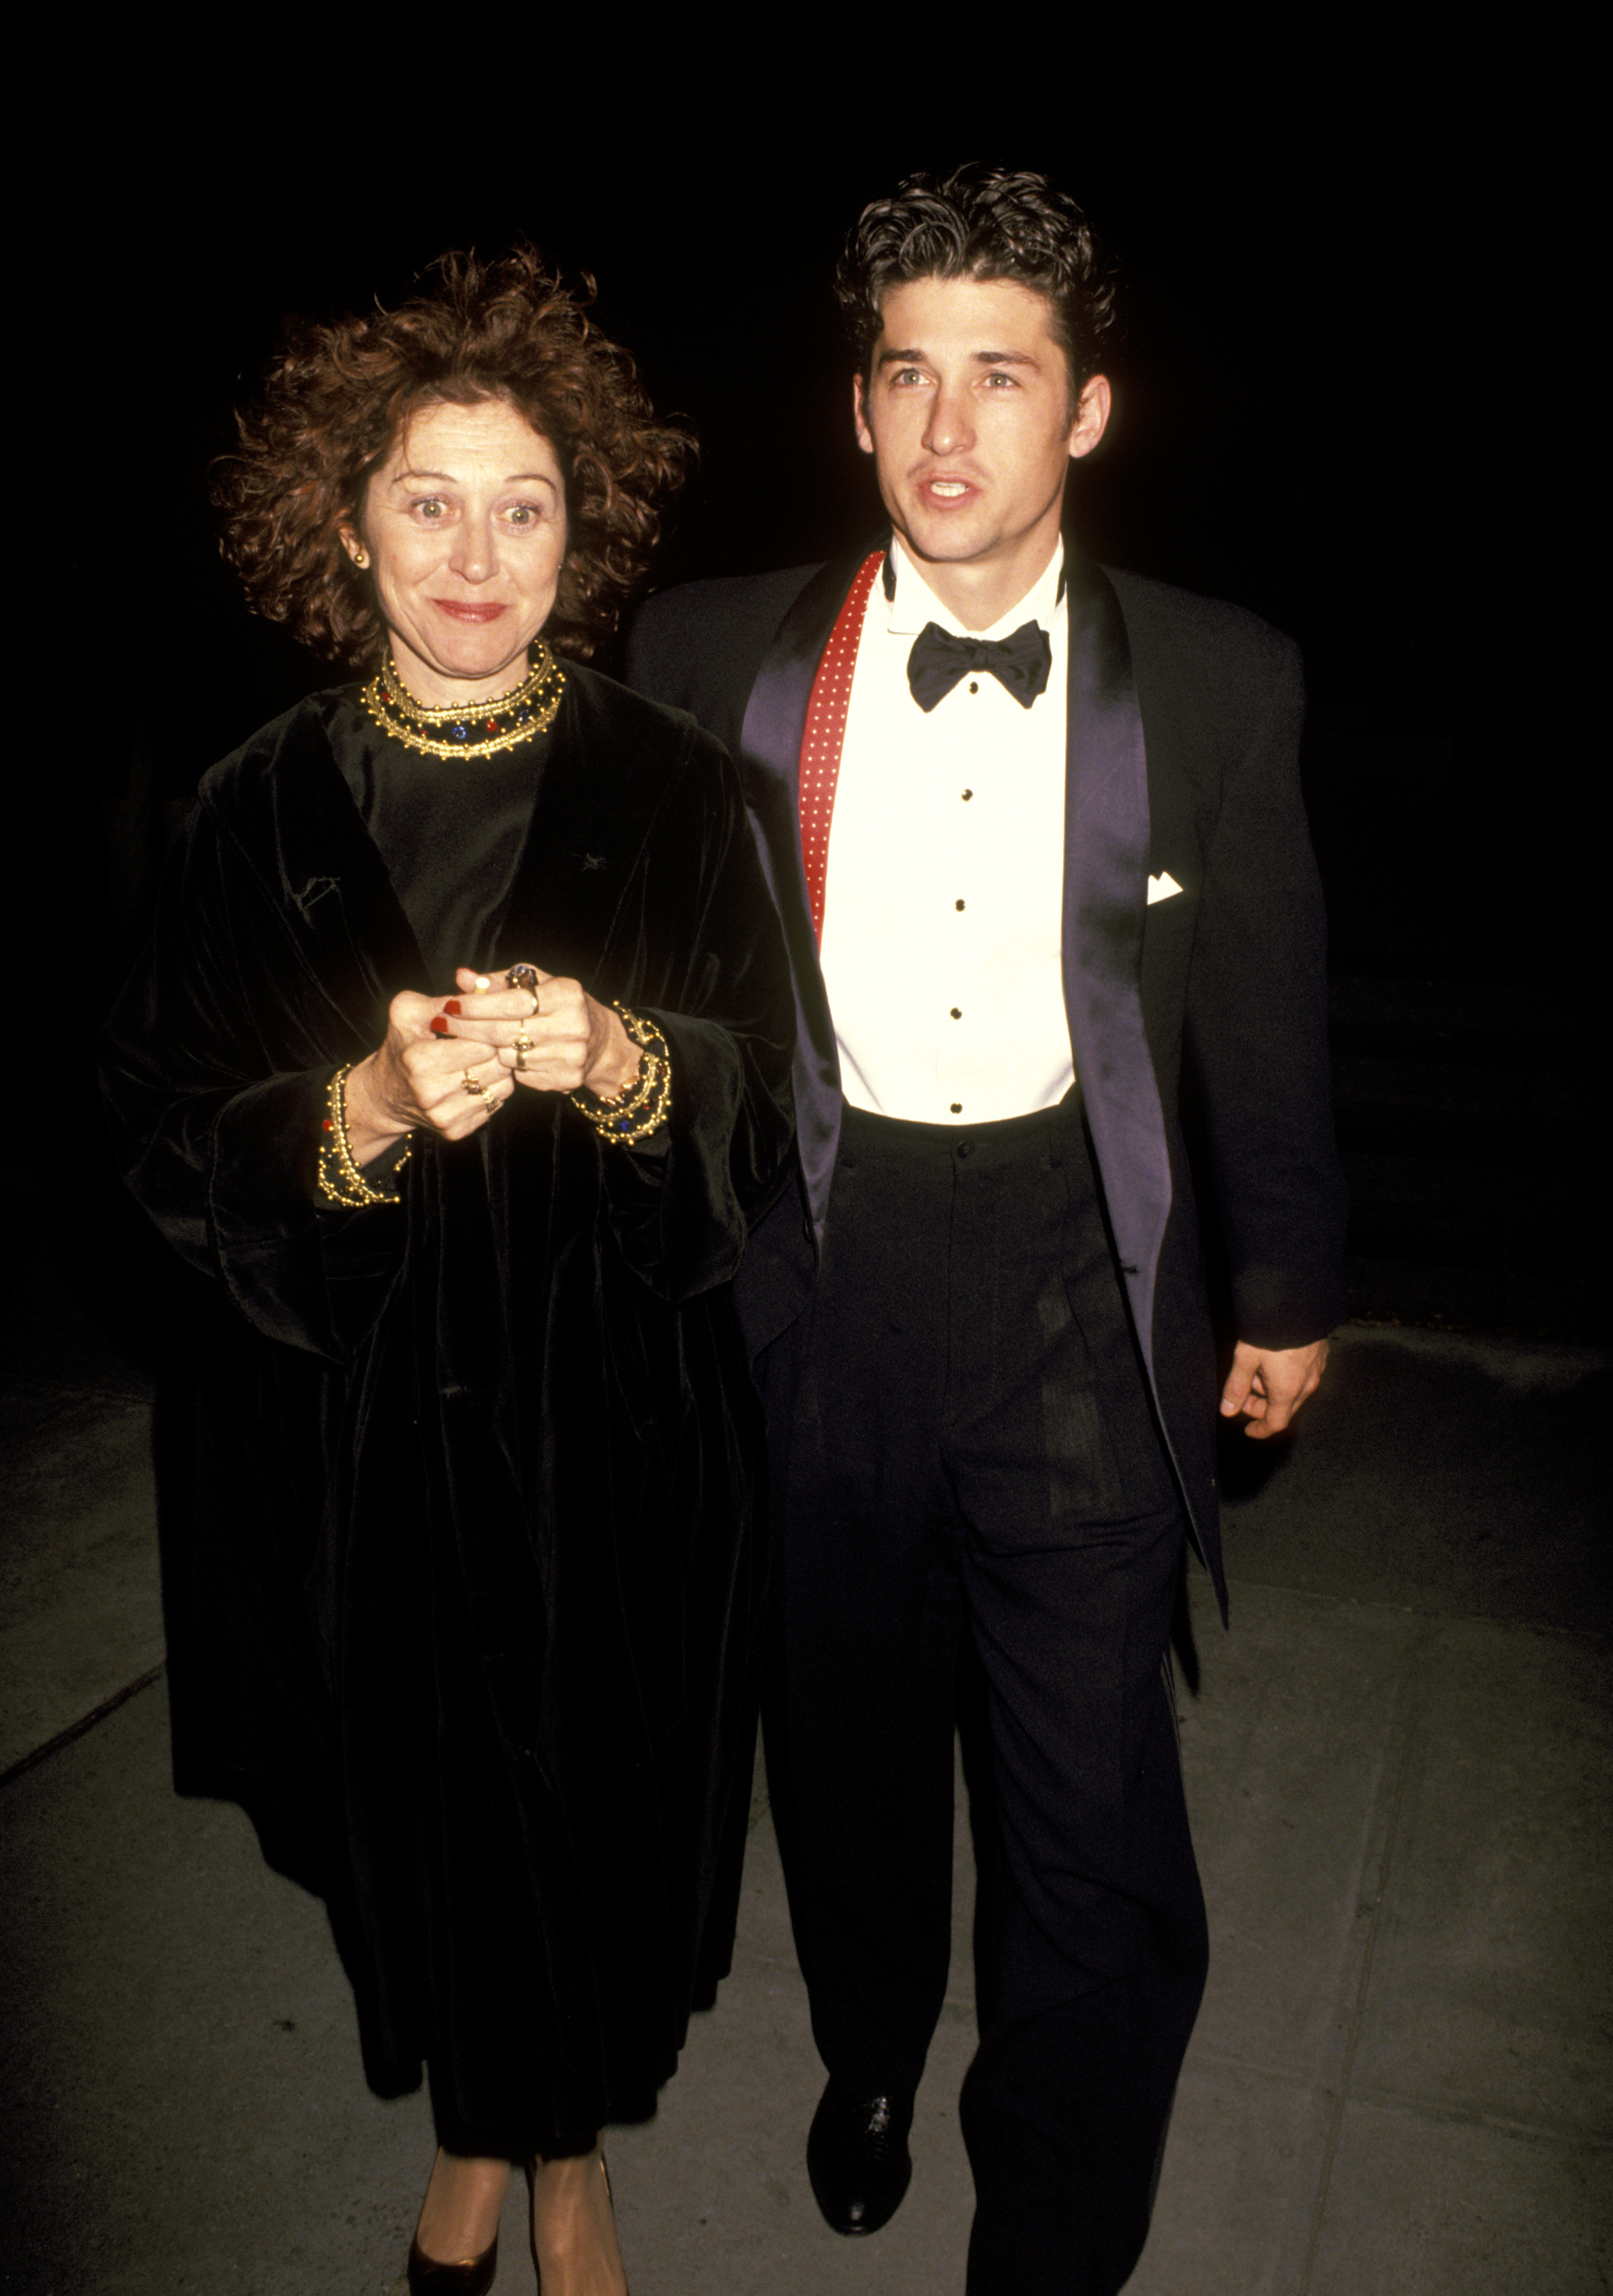 Rocky Parker and her then-husband at the "Cape Fear" New York premiere on October 6, 1991, in New York City | Source: Getty Images